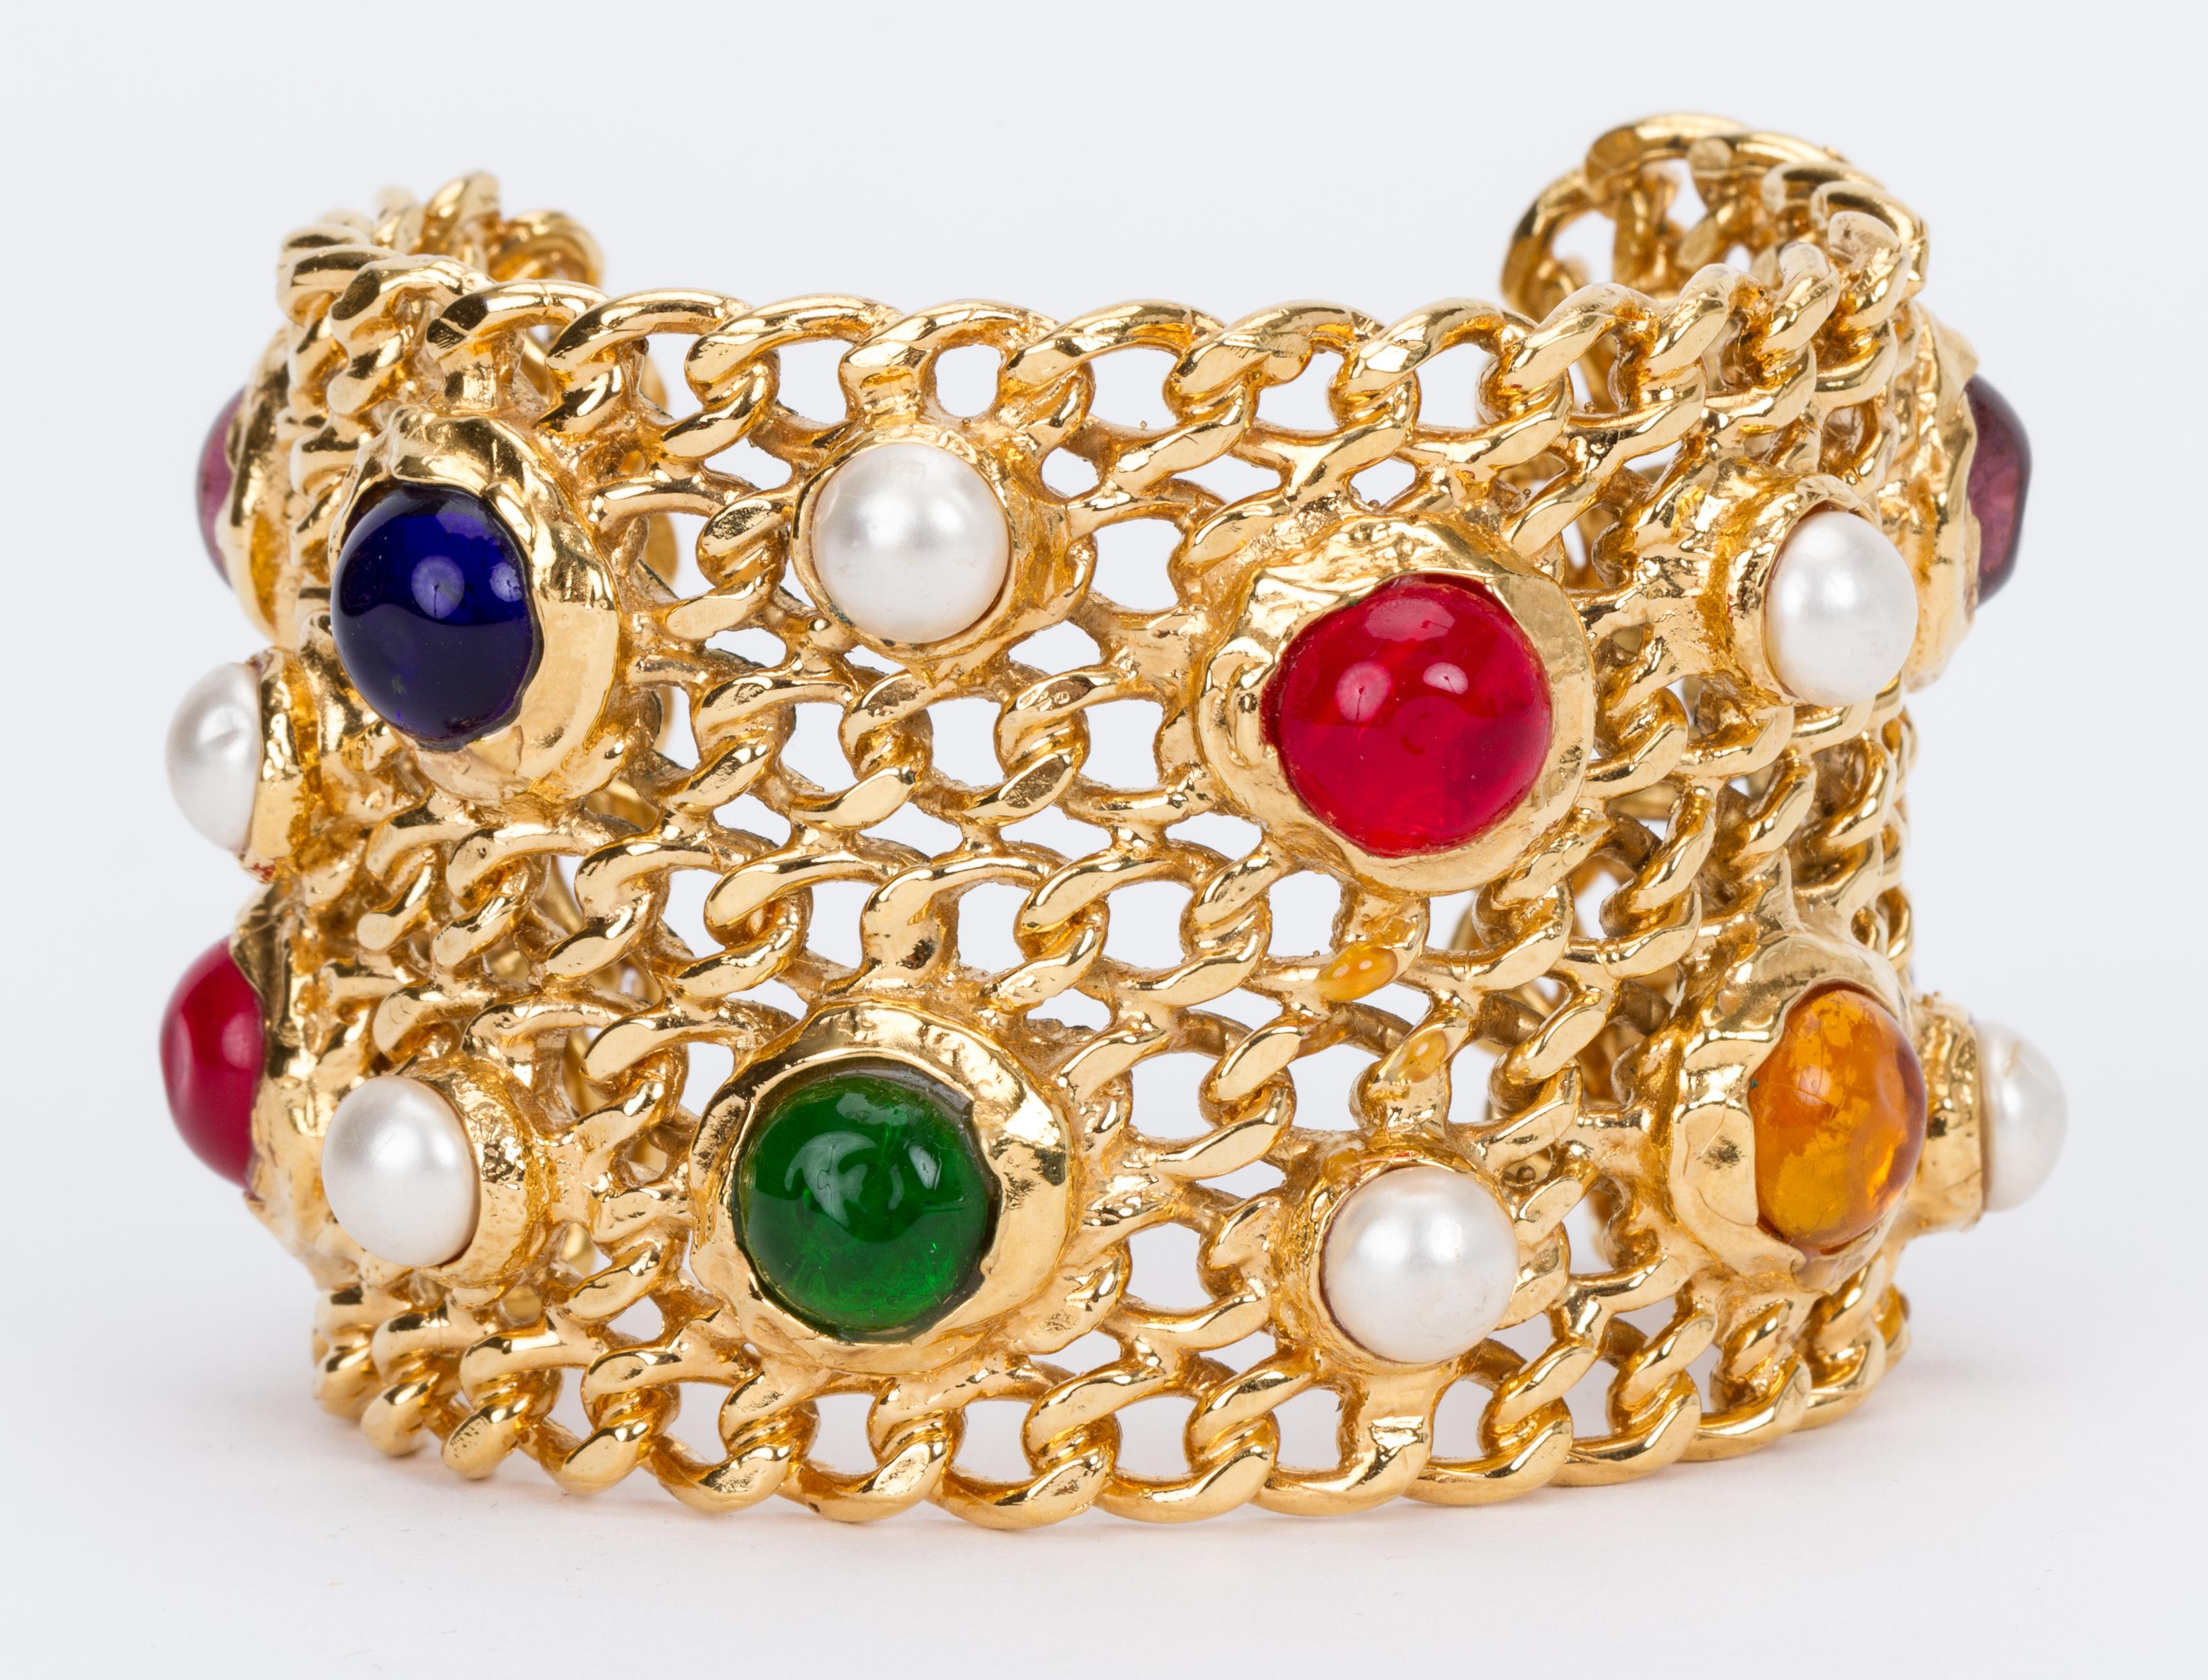 Chanel collectible faux pearl and multicolor gripoix (poured glass) chain cuff bracelet. Interior length 5.5